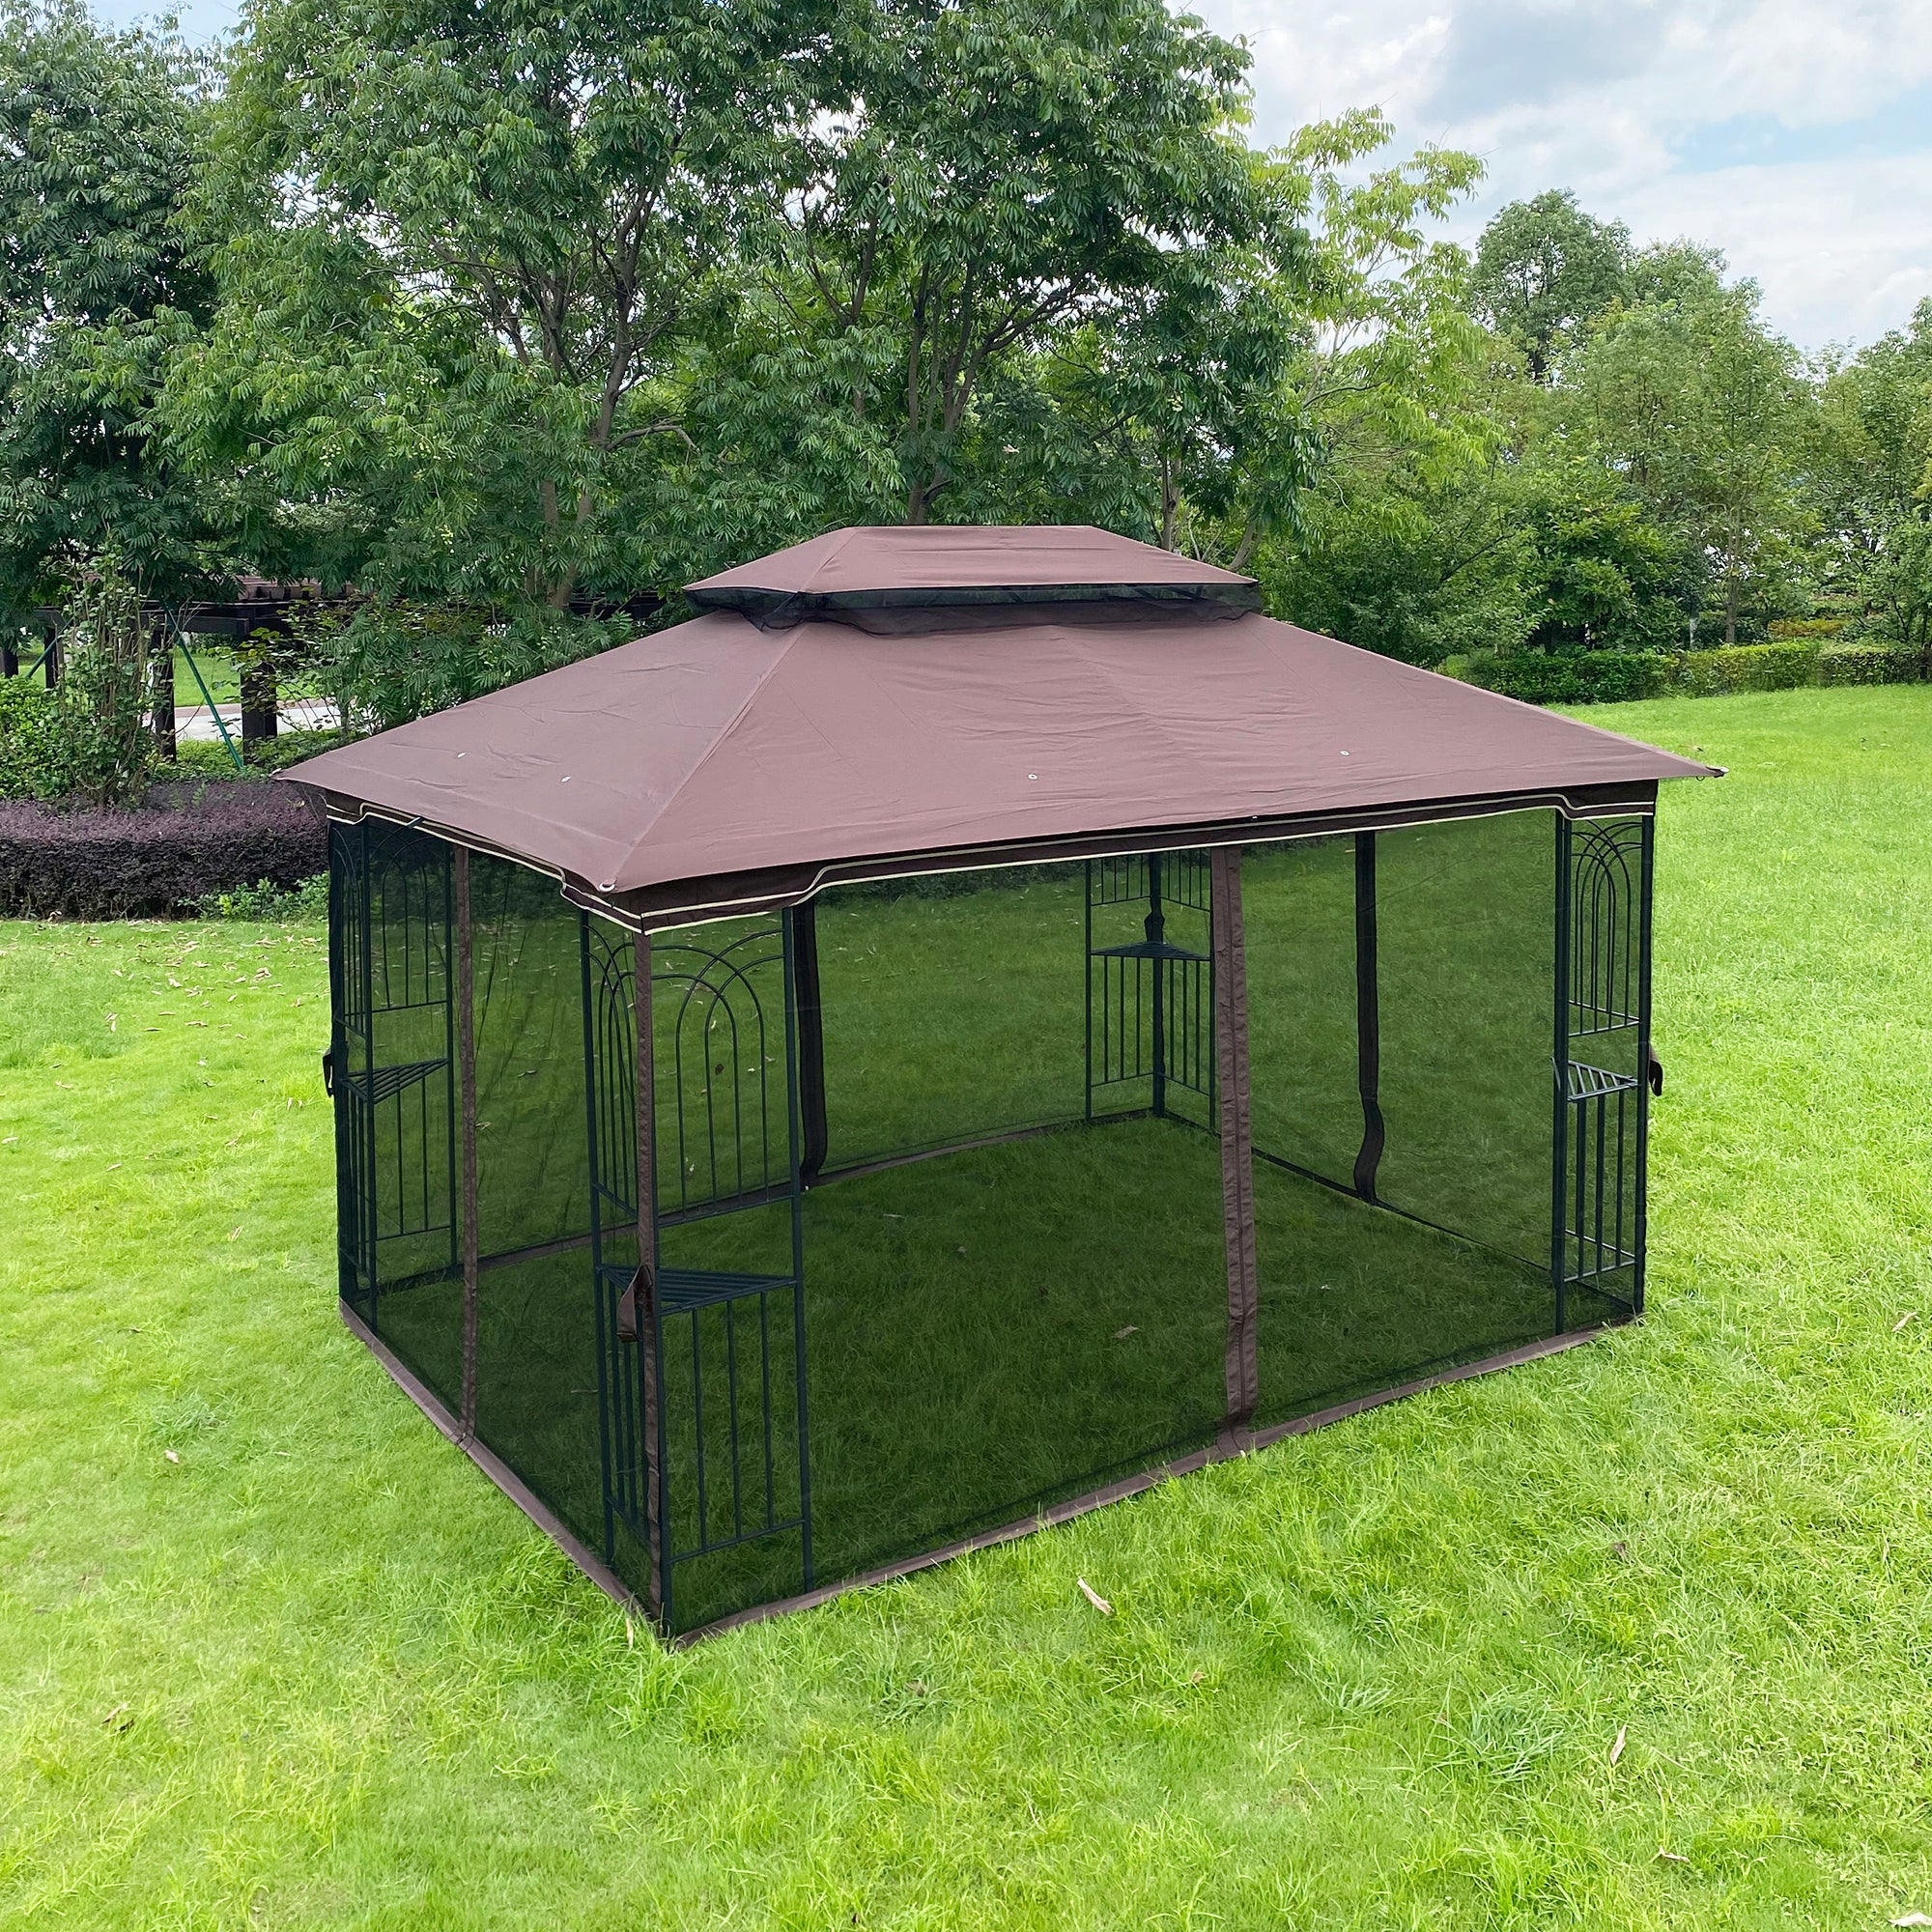 [KGORGE Plus]13 ft. x 10 ft.  Patio Gazebo Garden Canopy with Ventilated Double Roof and Mosquito net, Brown and Gray